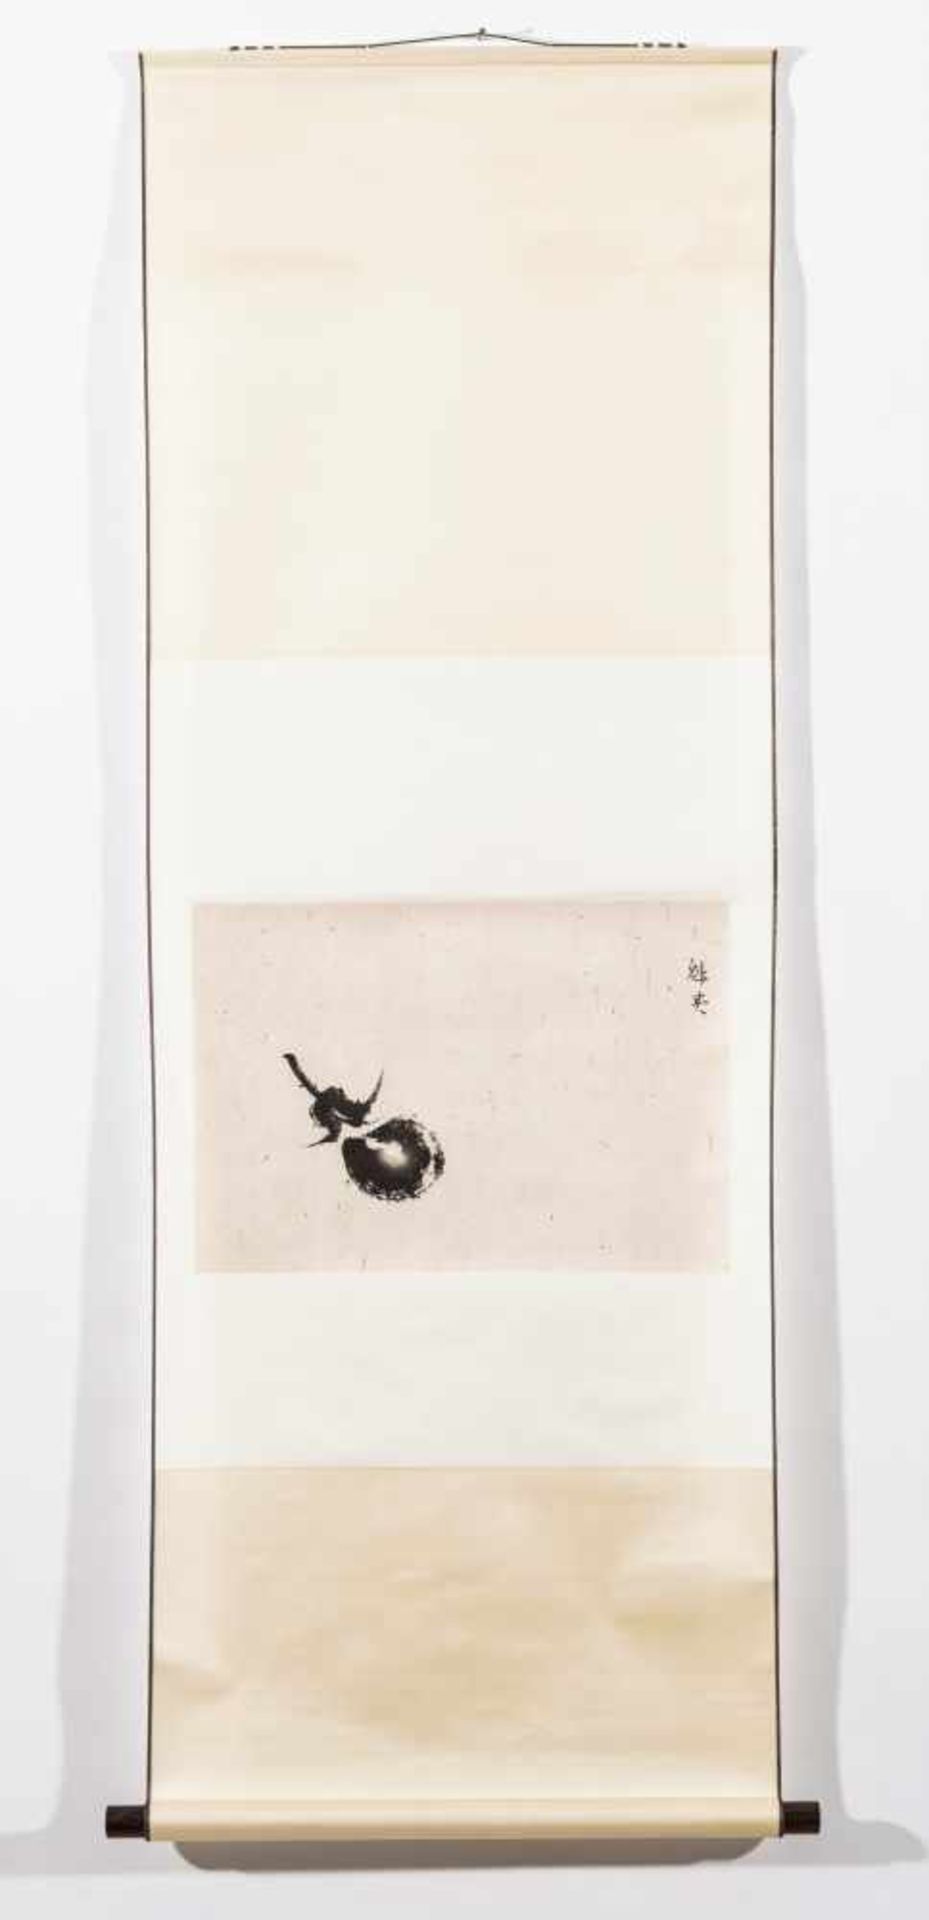 A JAPANESE SCROLL WITH AN EGGPLANT- MEIJI PERIOD Print on paper, mounted to a brocade scroll, with - Image 2 of 2